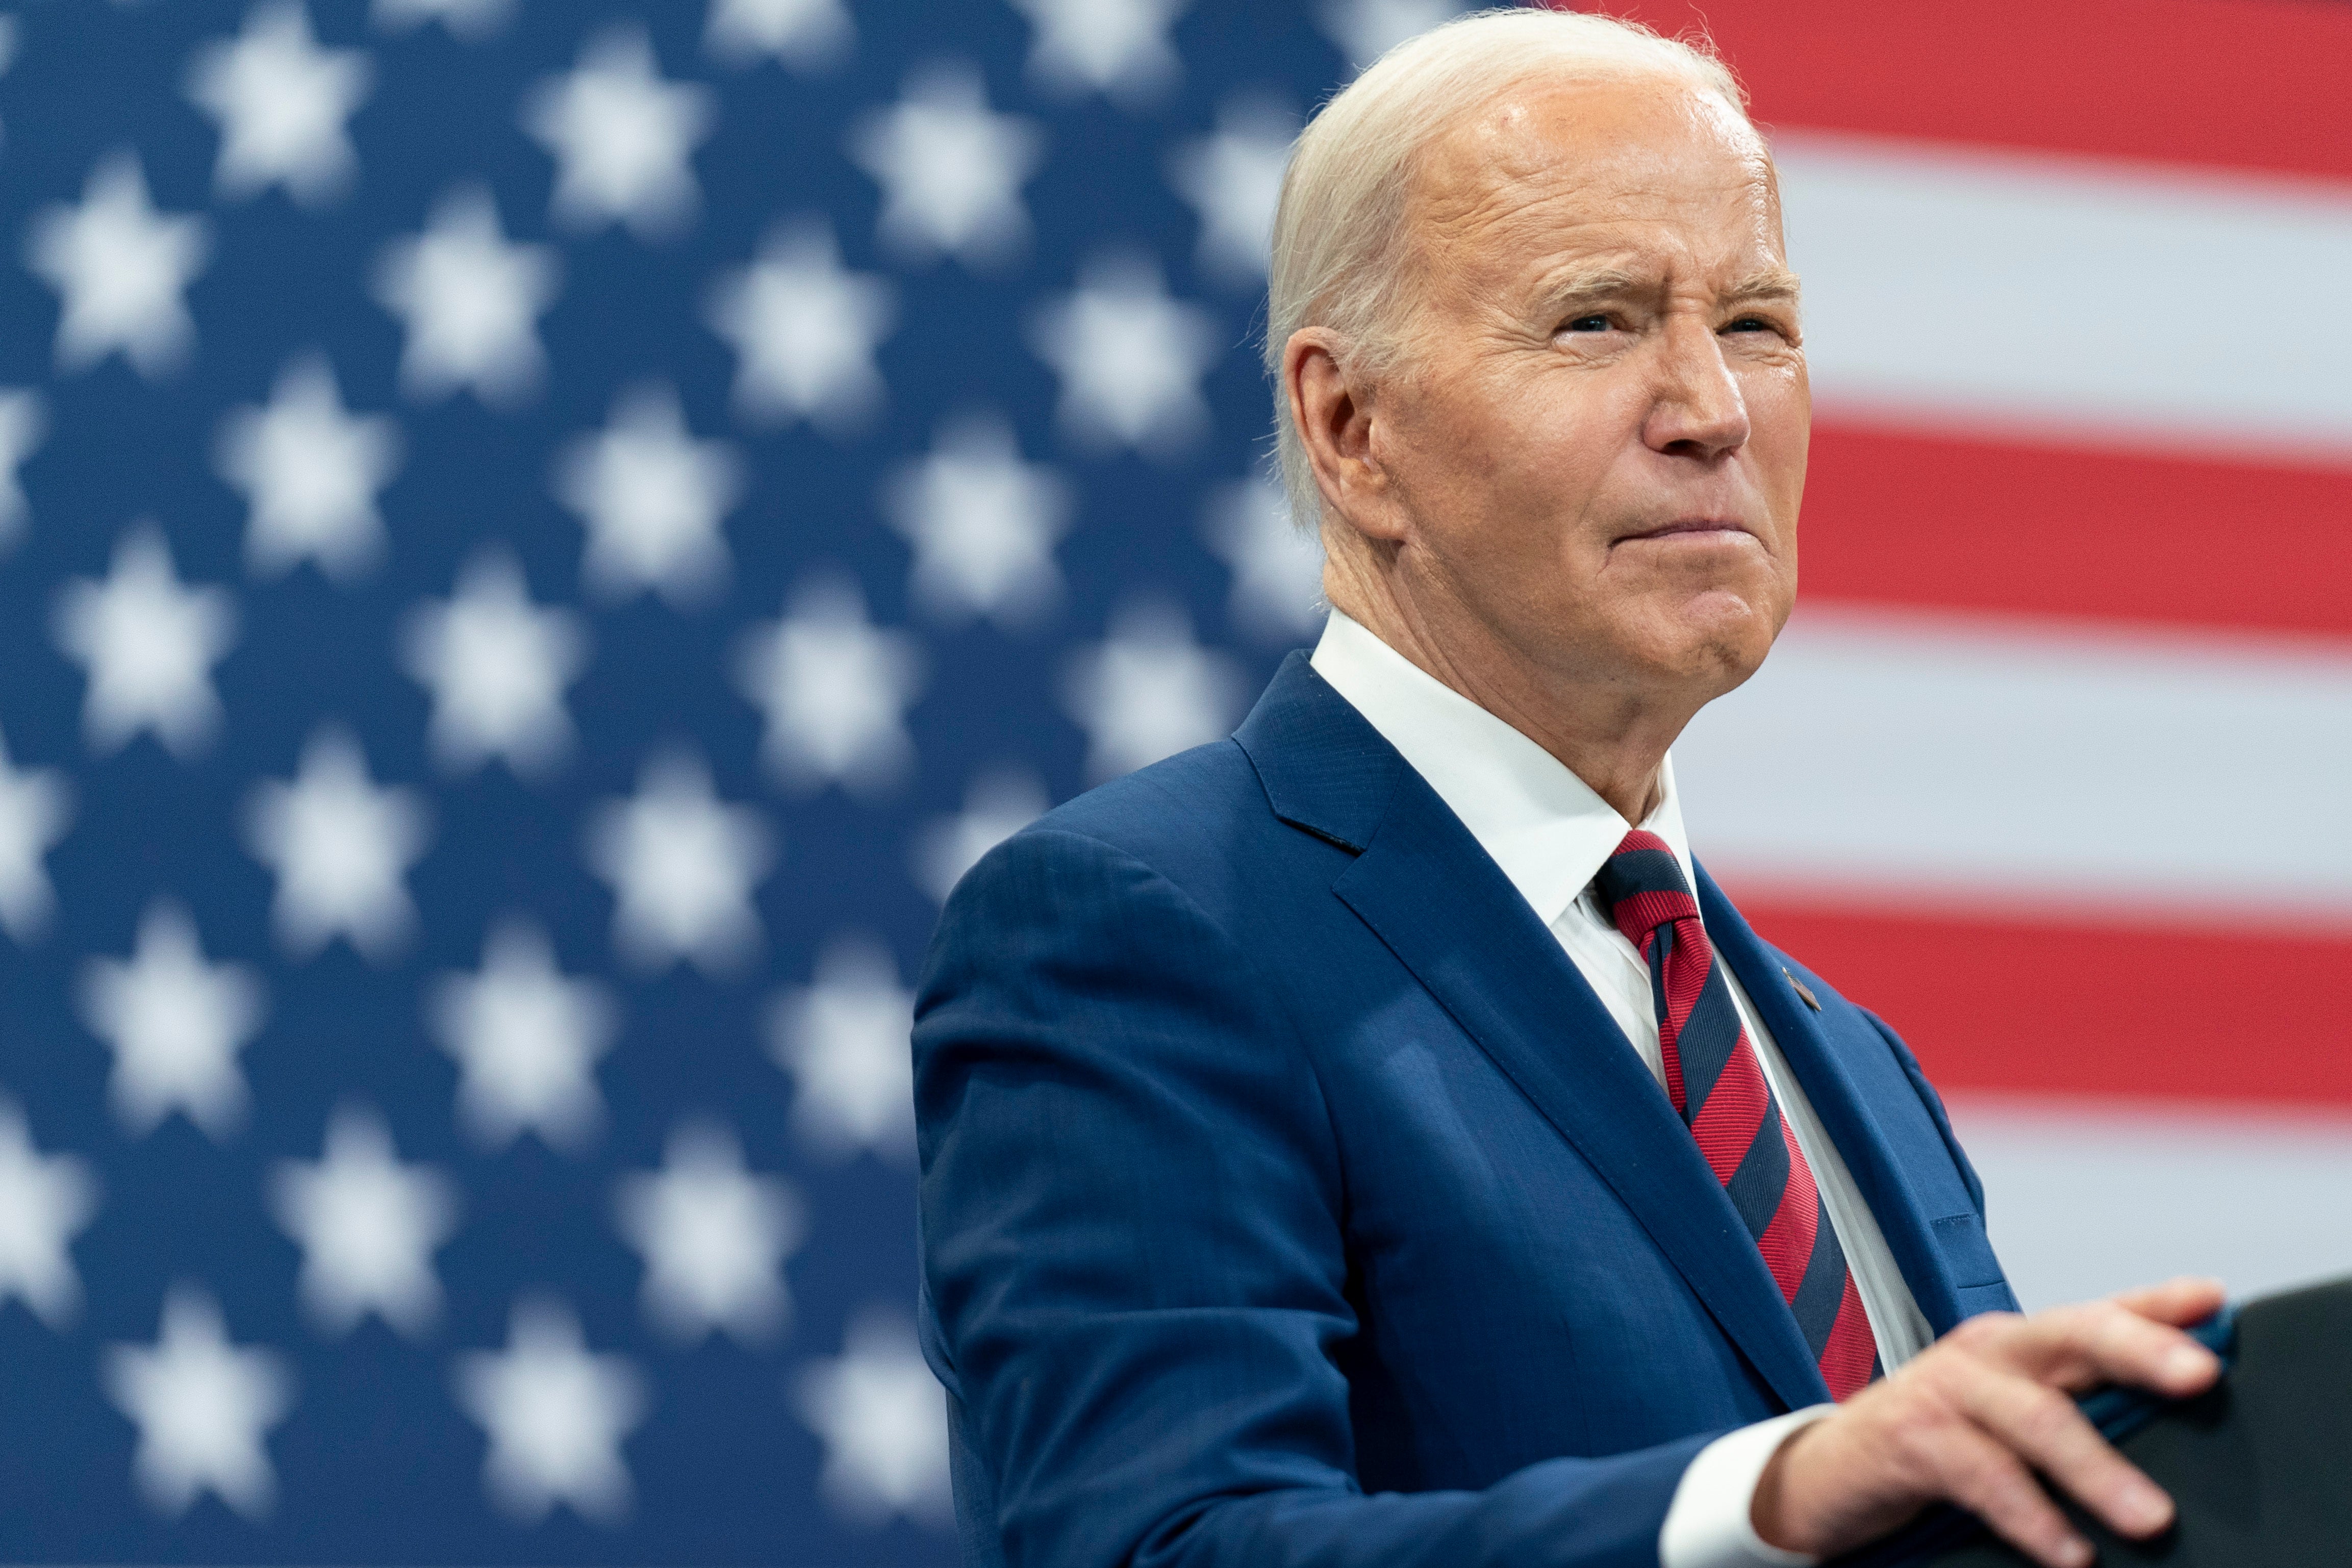 President Biden has been unable to deliver major pledges in Congress, largely due to Republican opposition